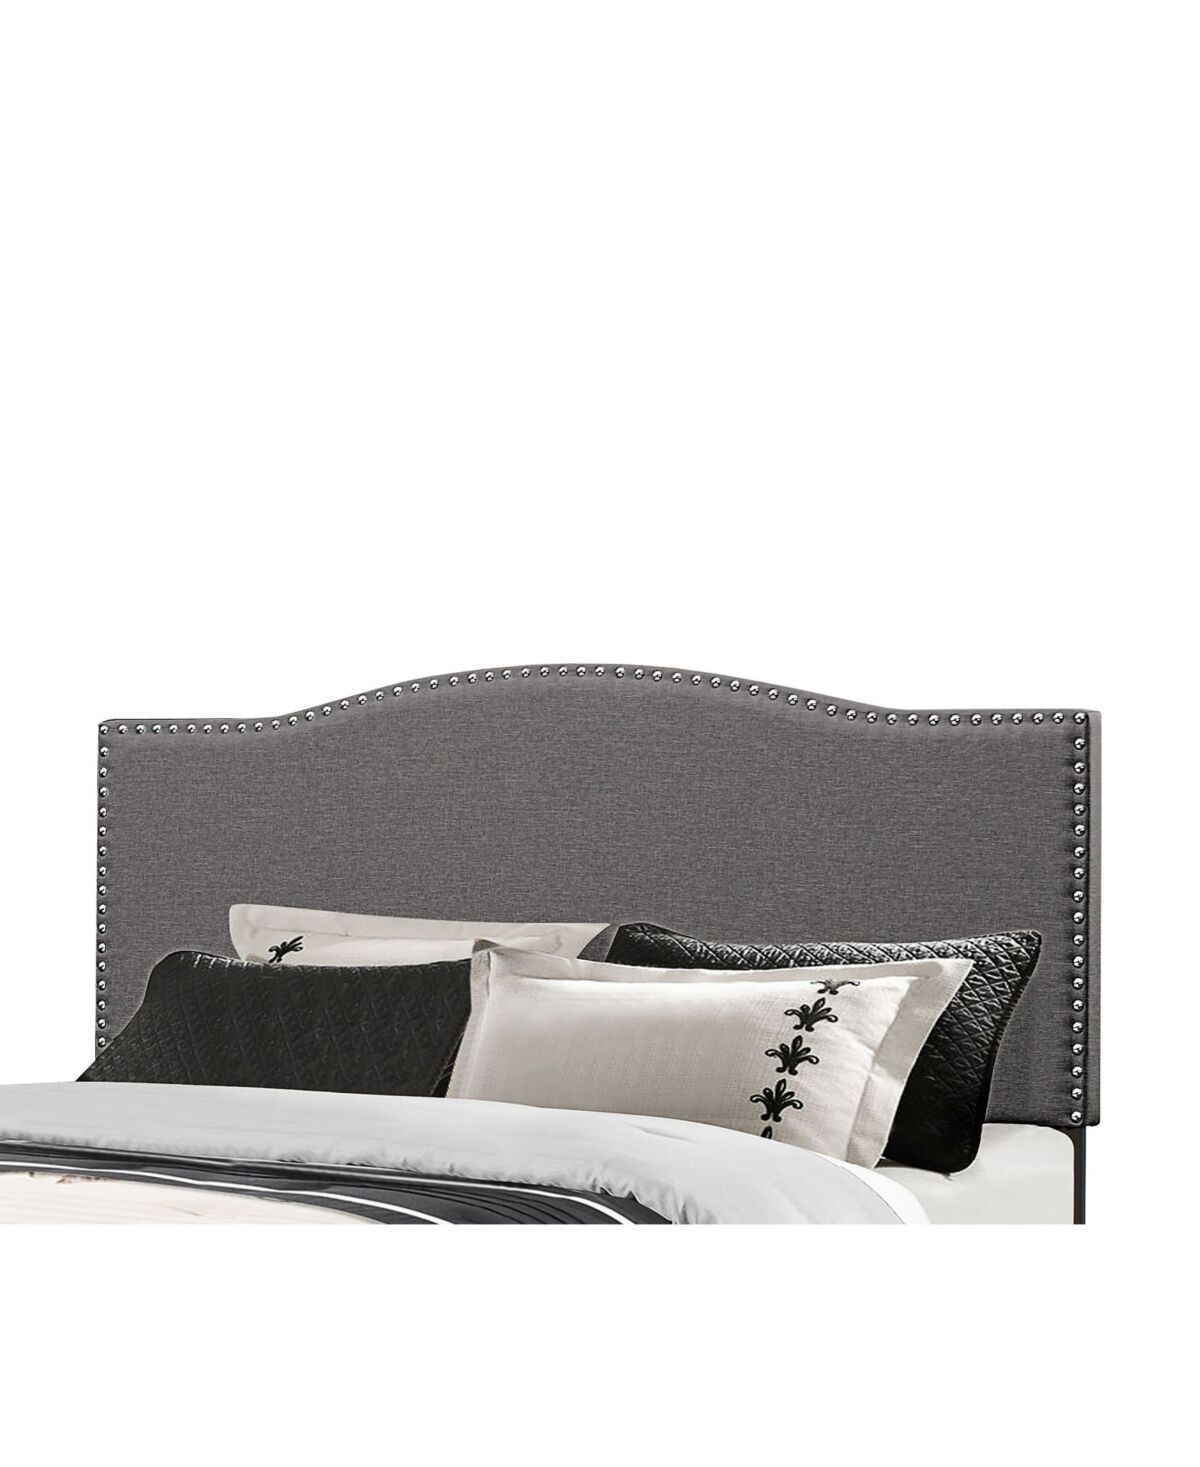 Hillsdale Kiley Full/Queen Upholstered Headboard with Metal Bed Frame - Slate